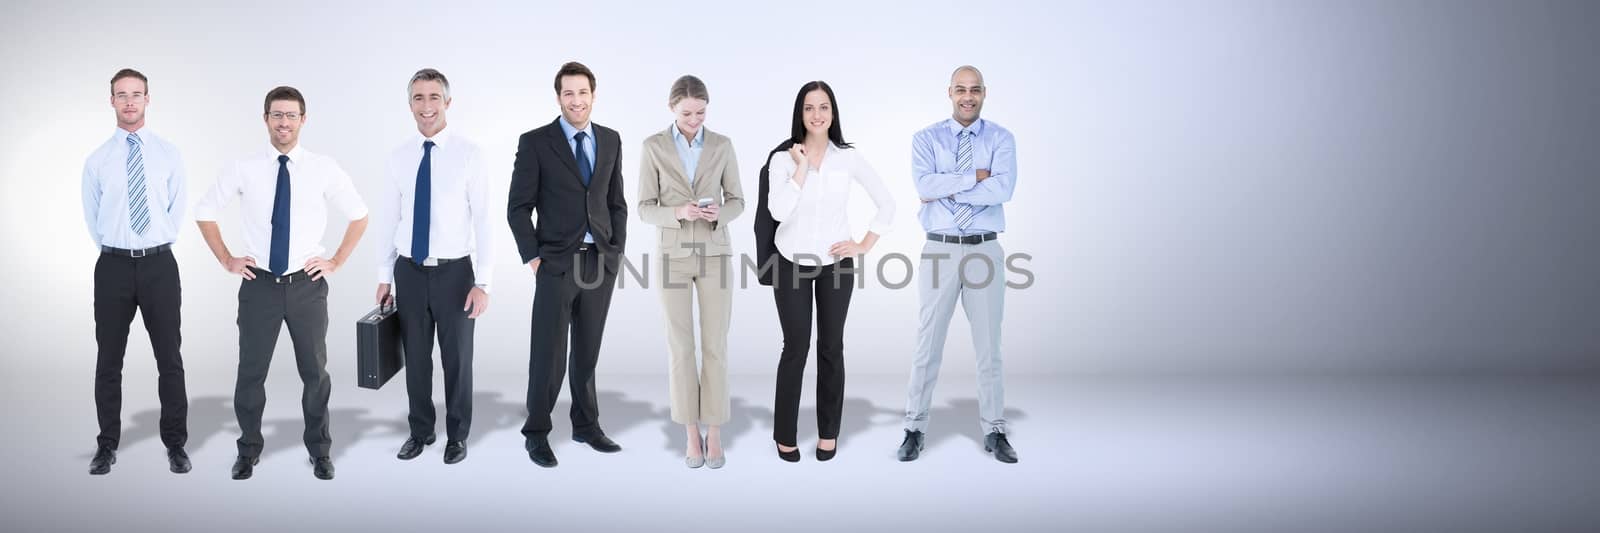 Digital composite of Business people with flare light source